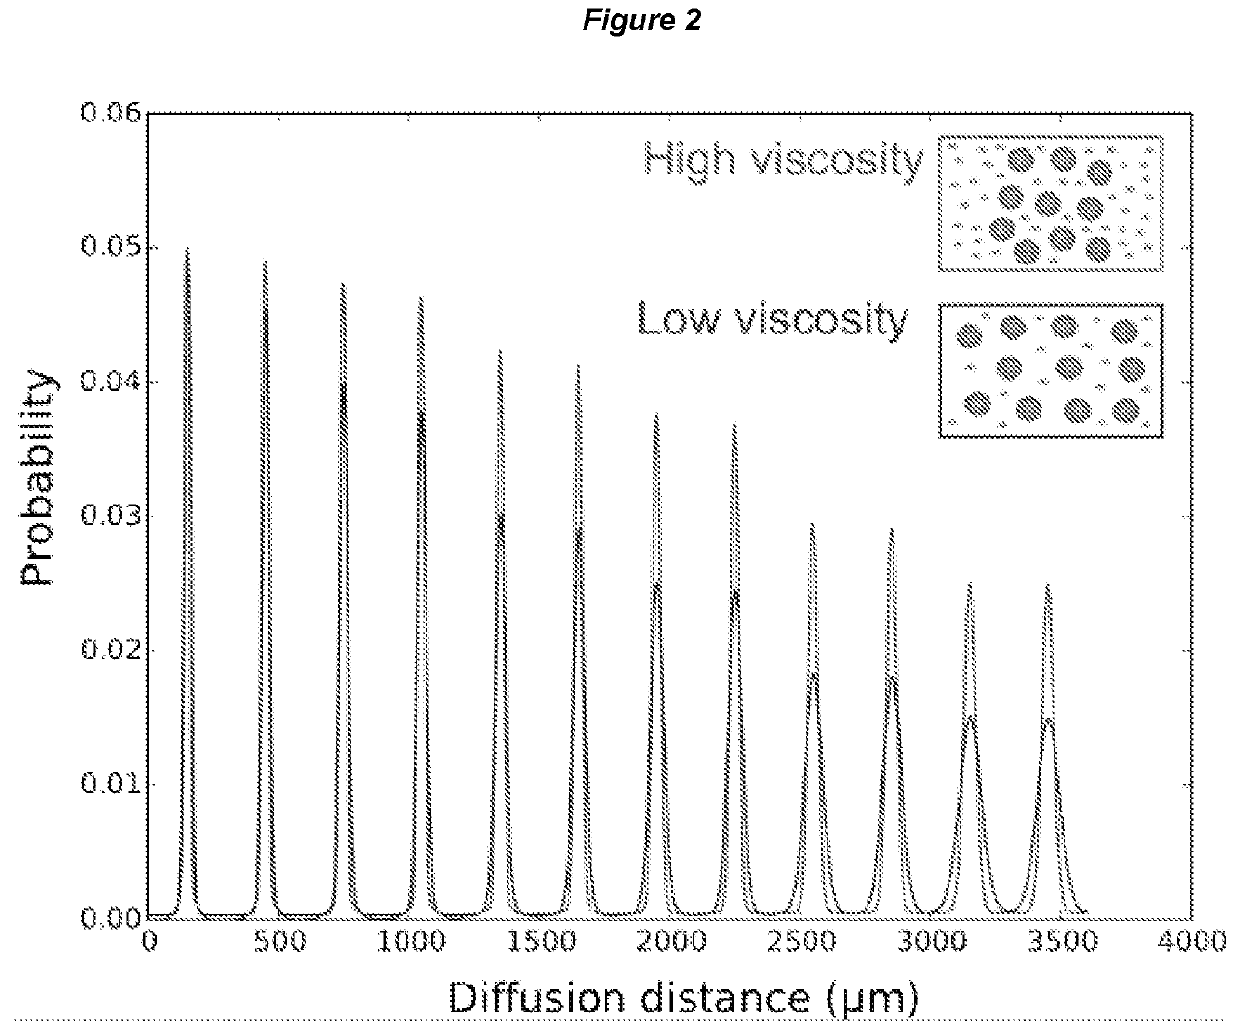 Viscosity measurements based on tracer diffusion